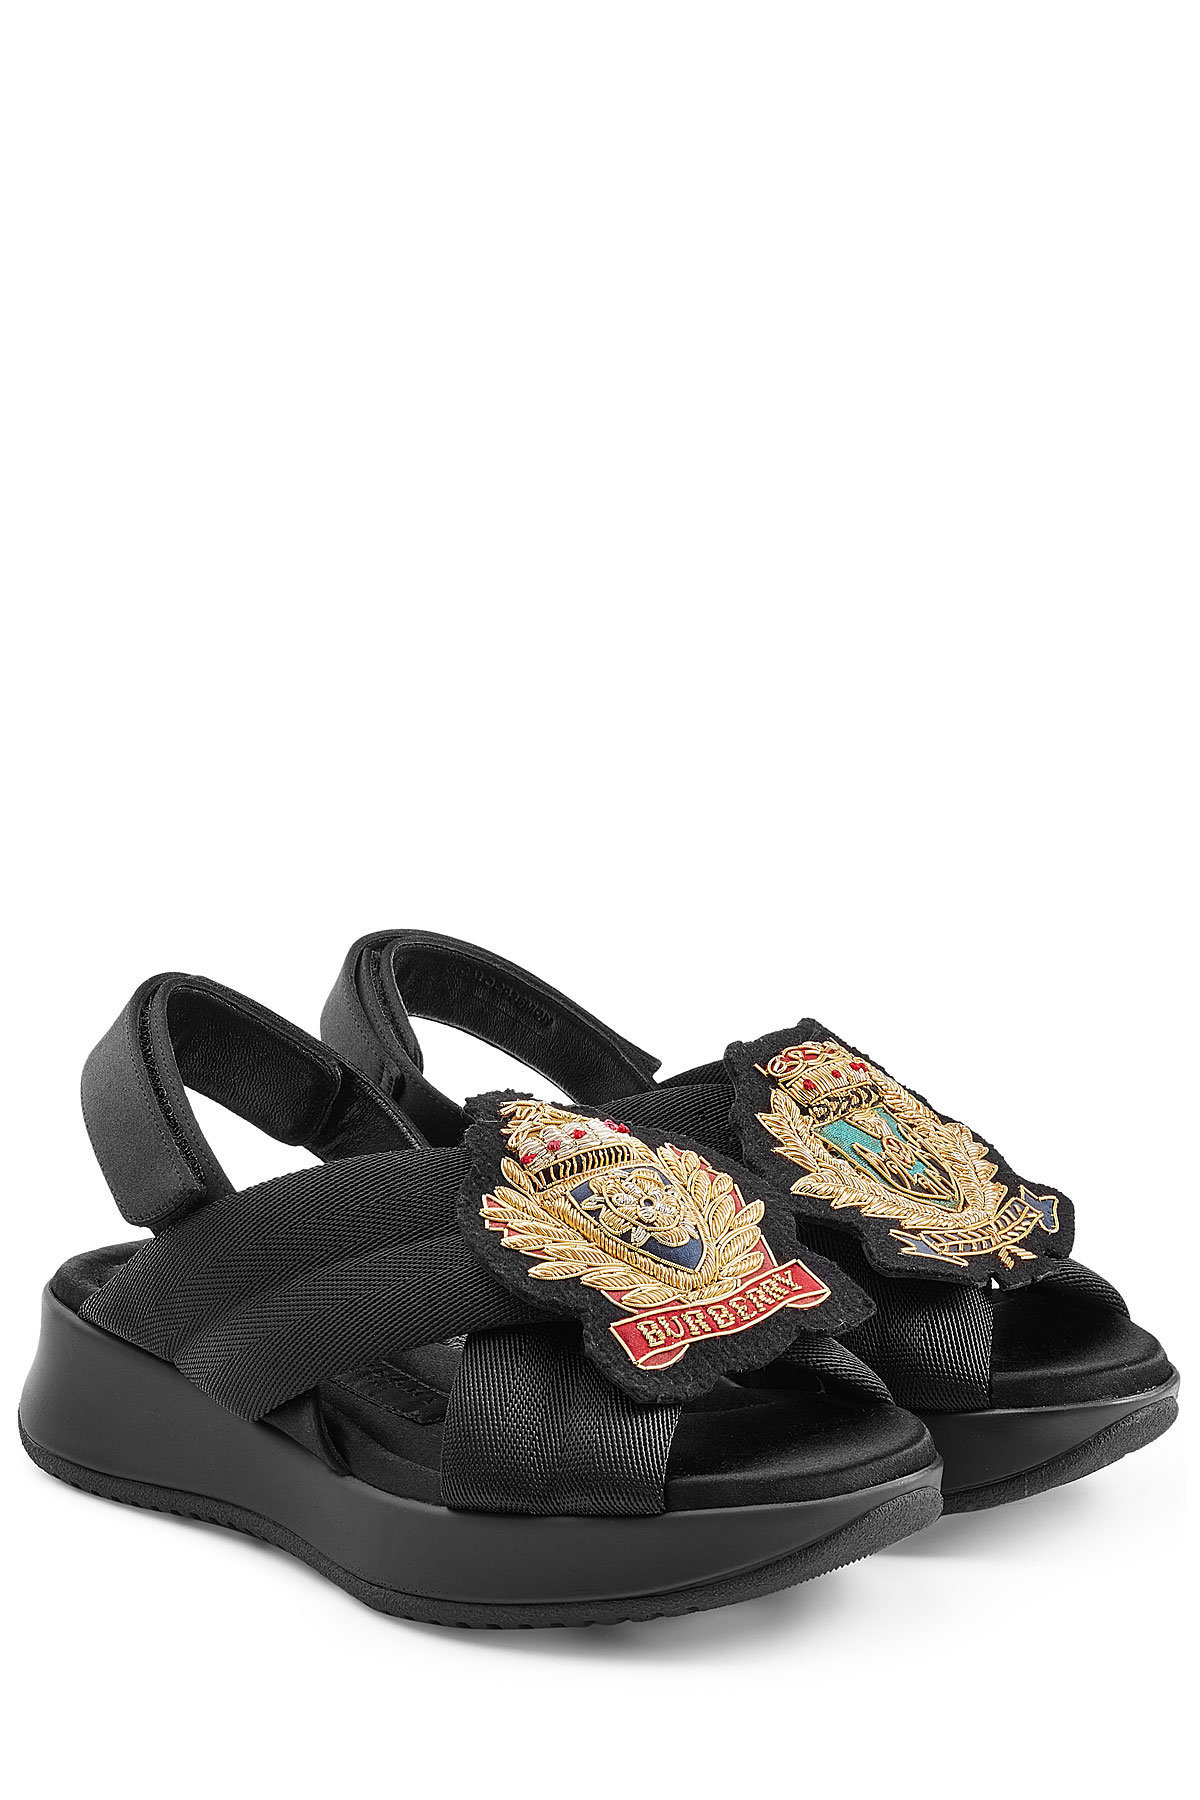 Burberry - Fabric Sandals with Embroidered Badge